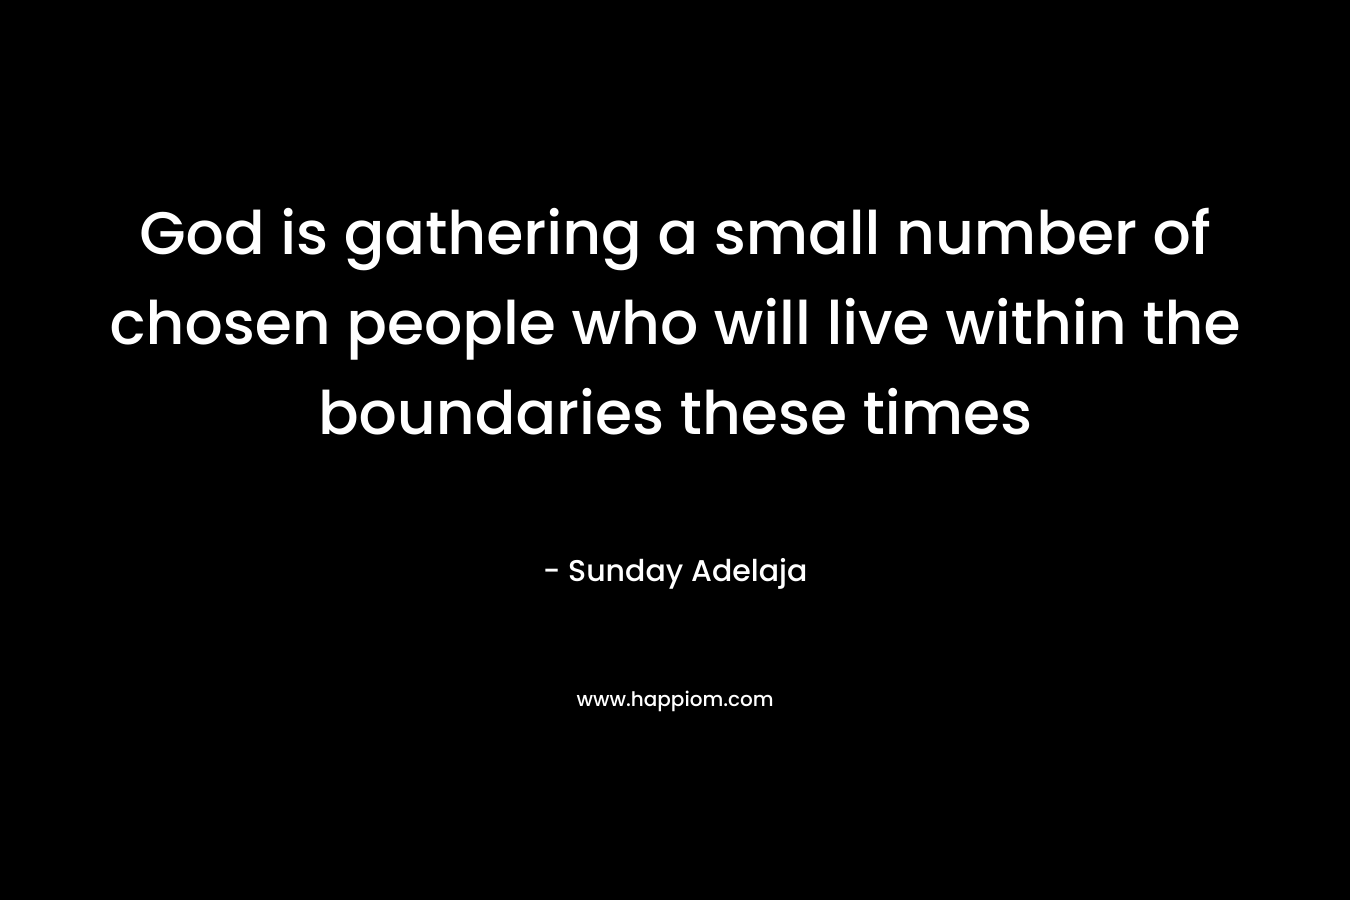 God is gathering a small number of chosen people who will live within the boundaries these times